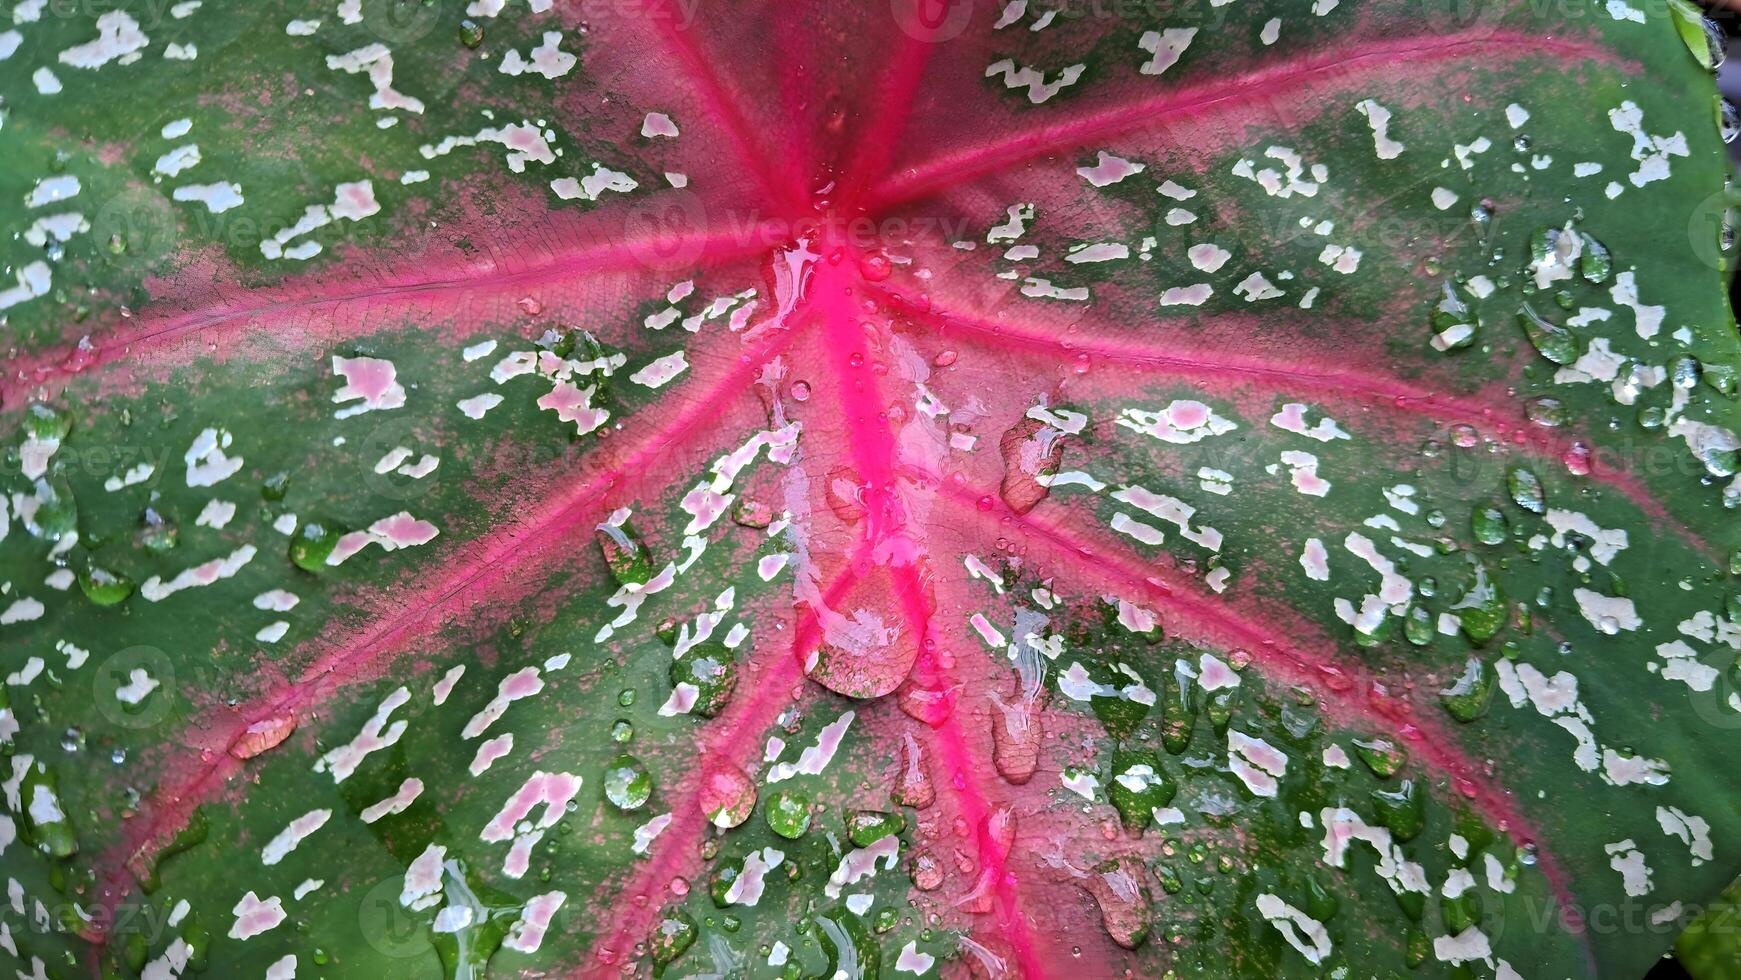 close-up photo of leaves with pink and white spots